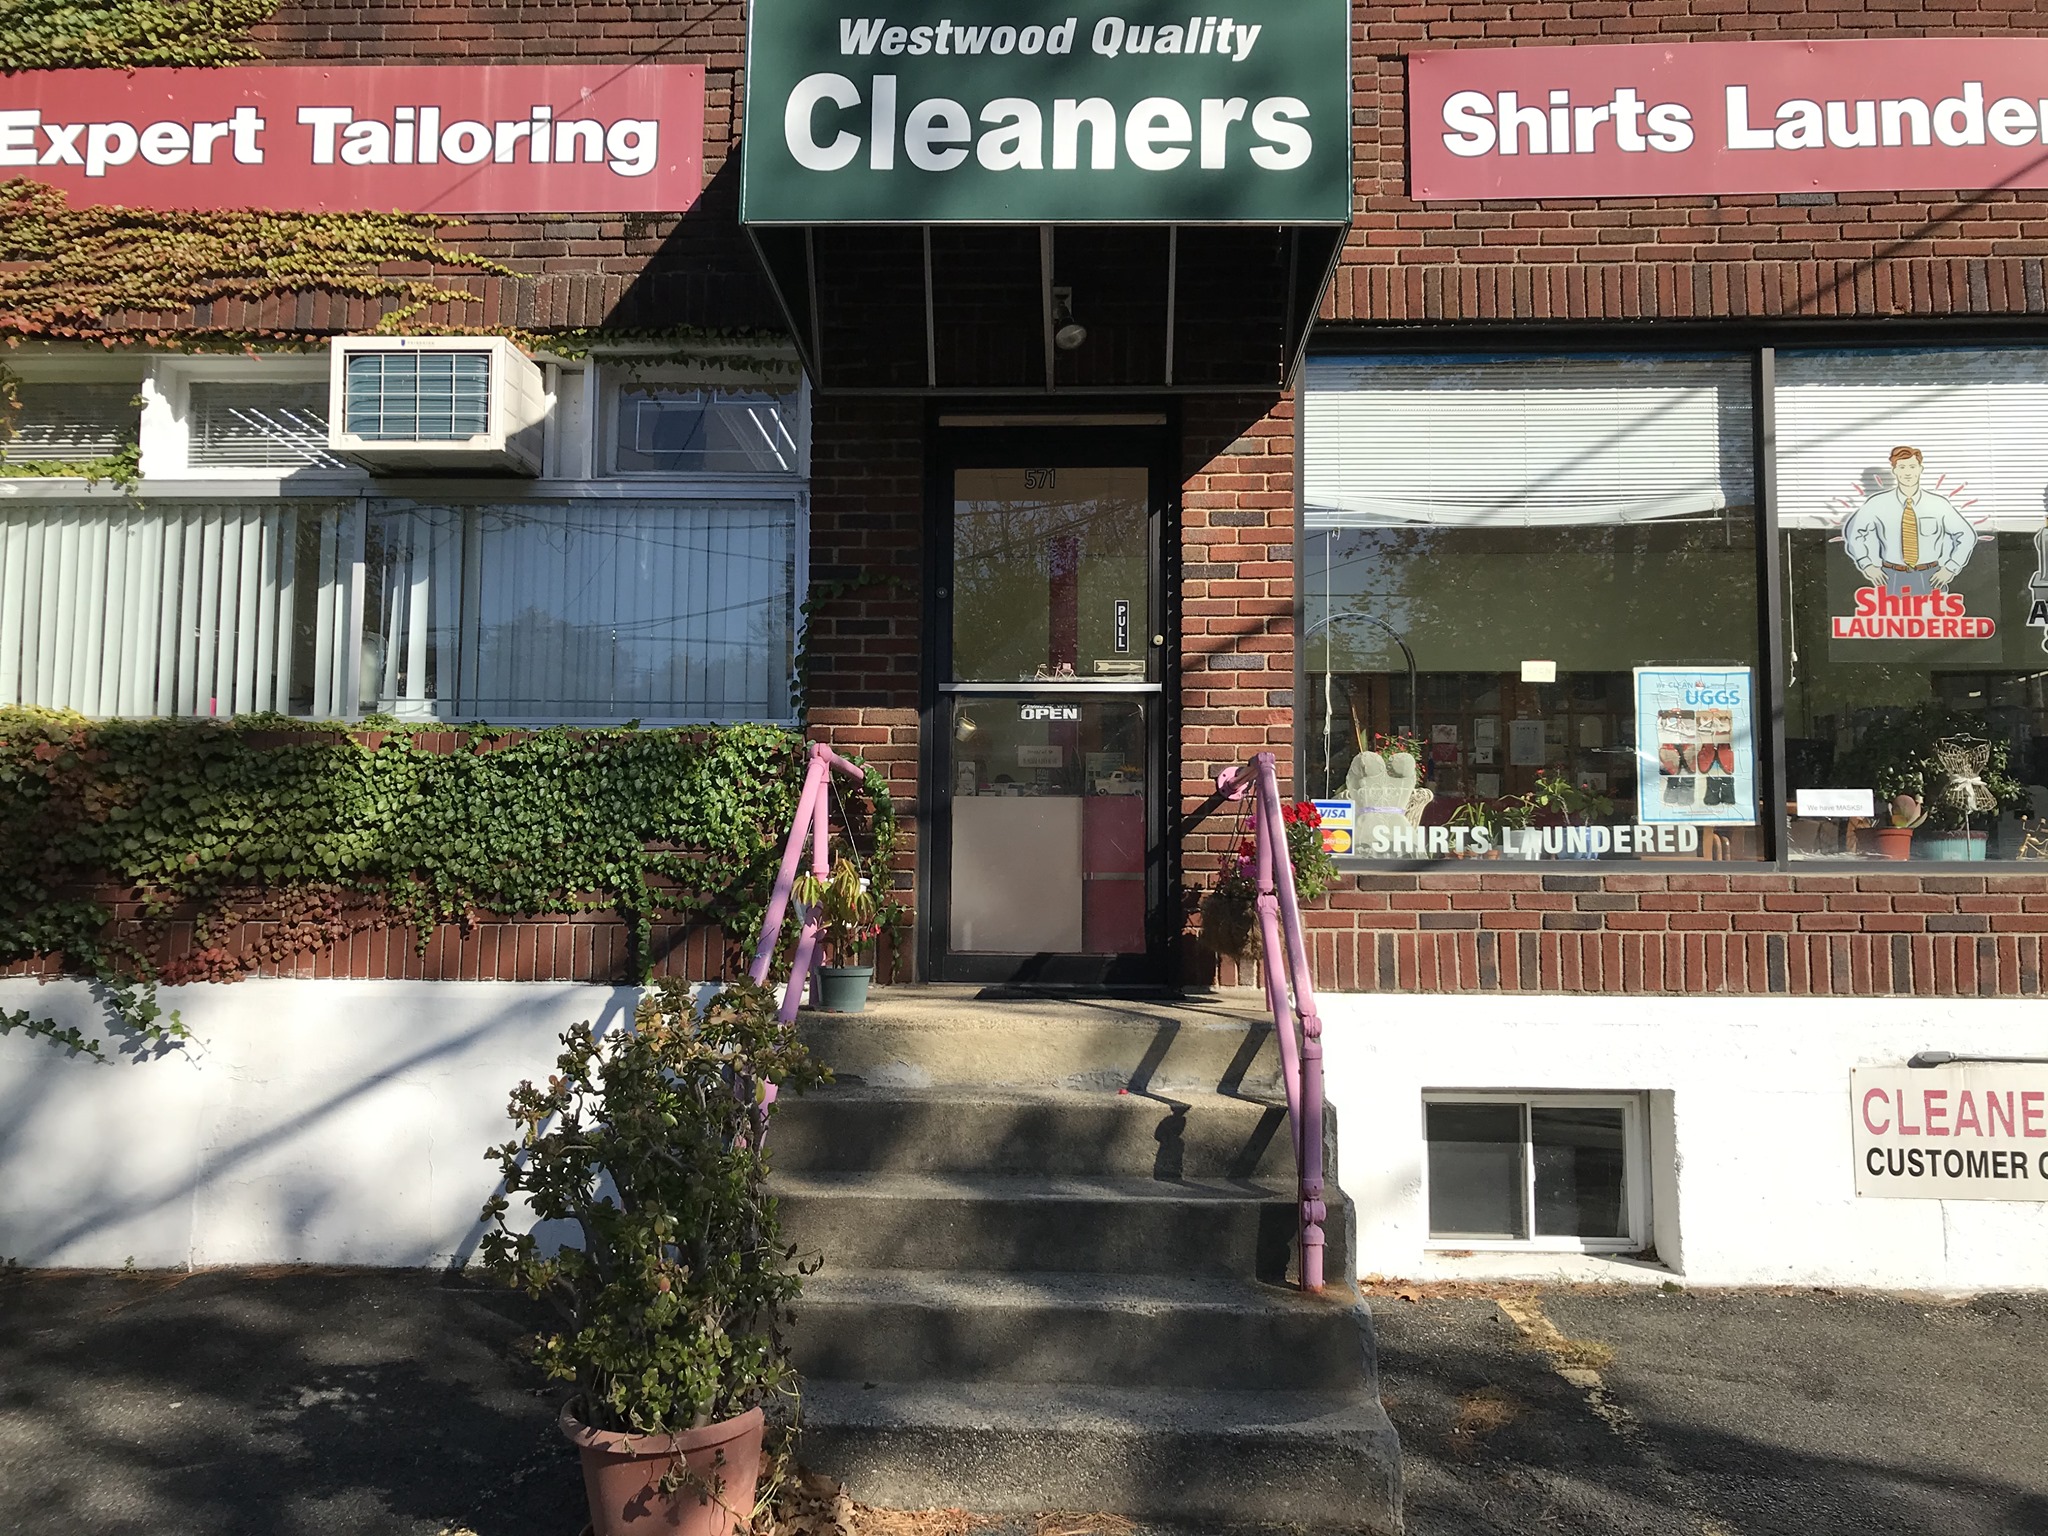 Westwood Quality Cleaners